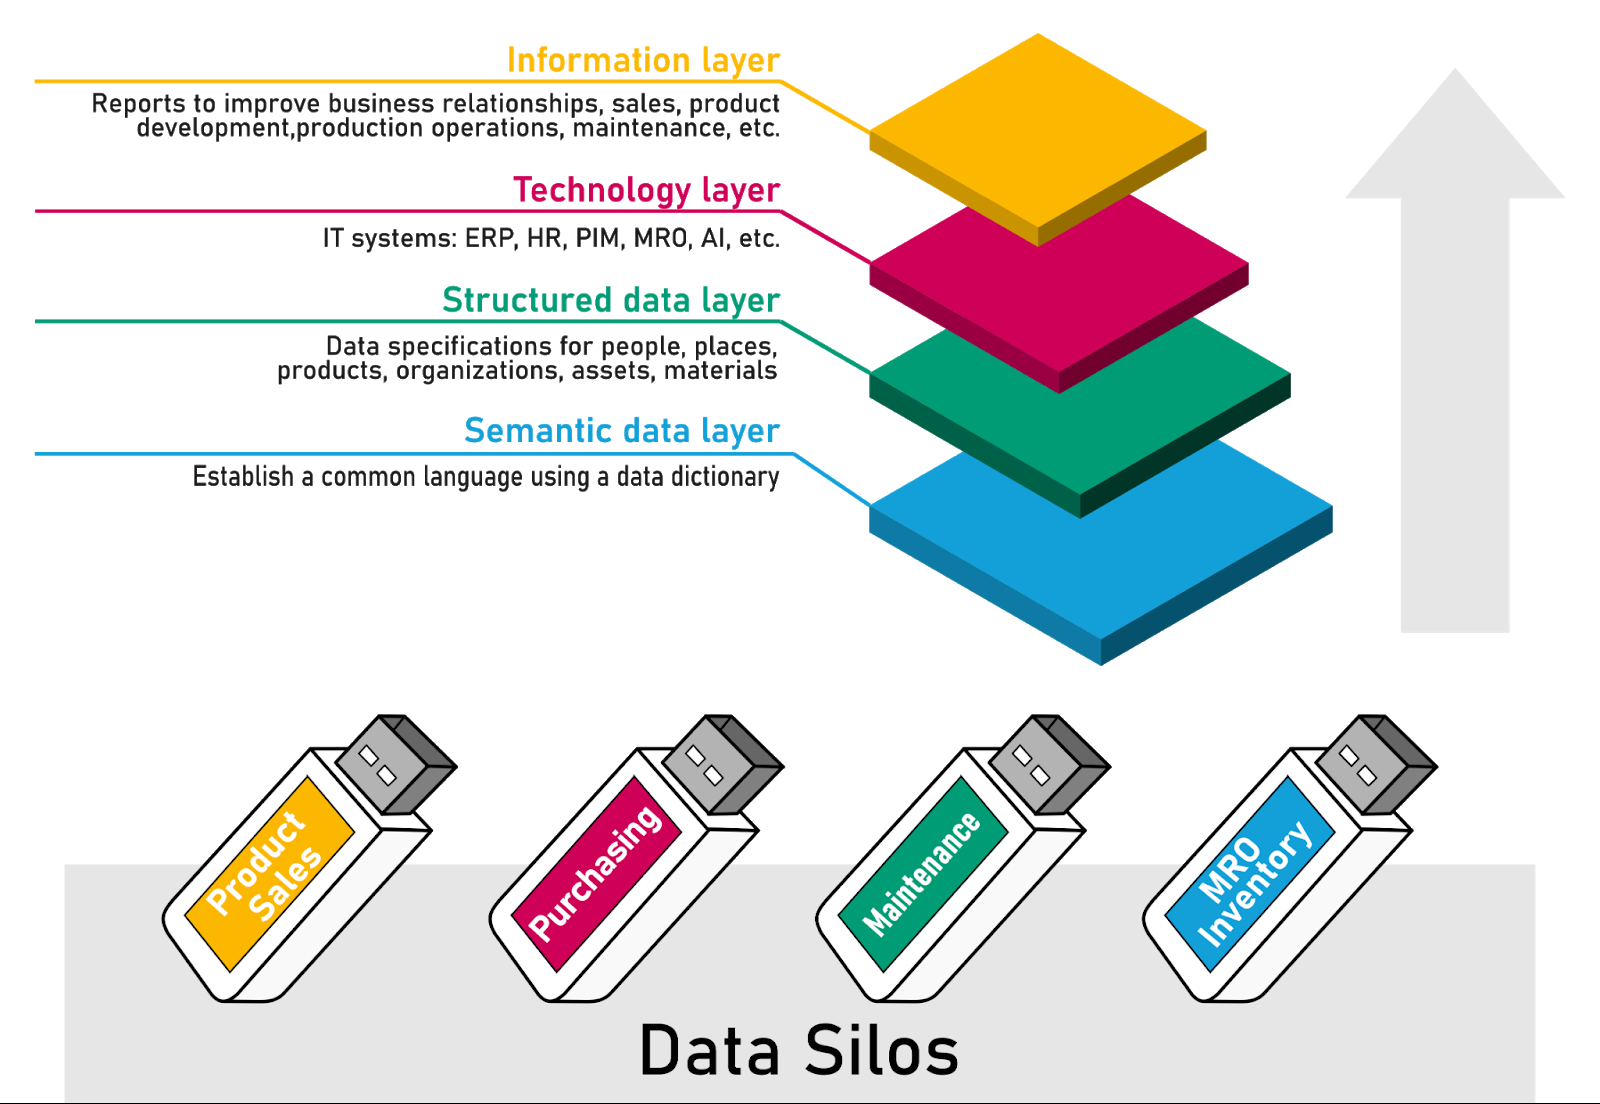 How do you create quality information from data silos